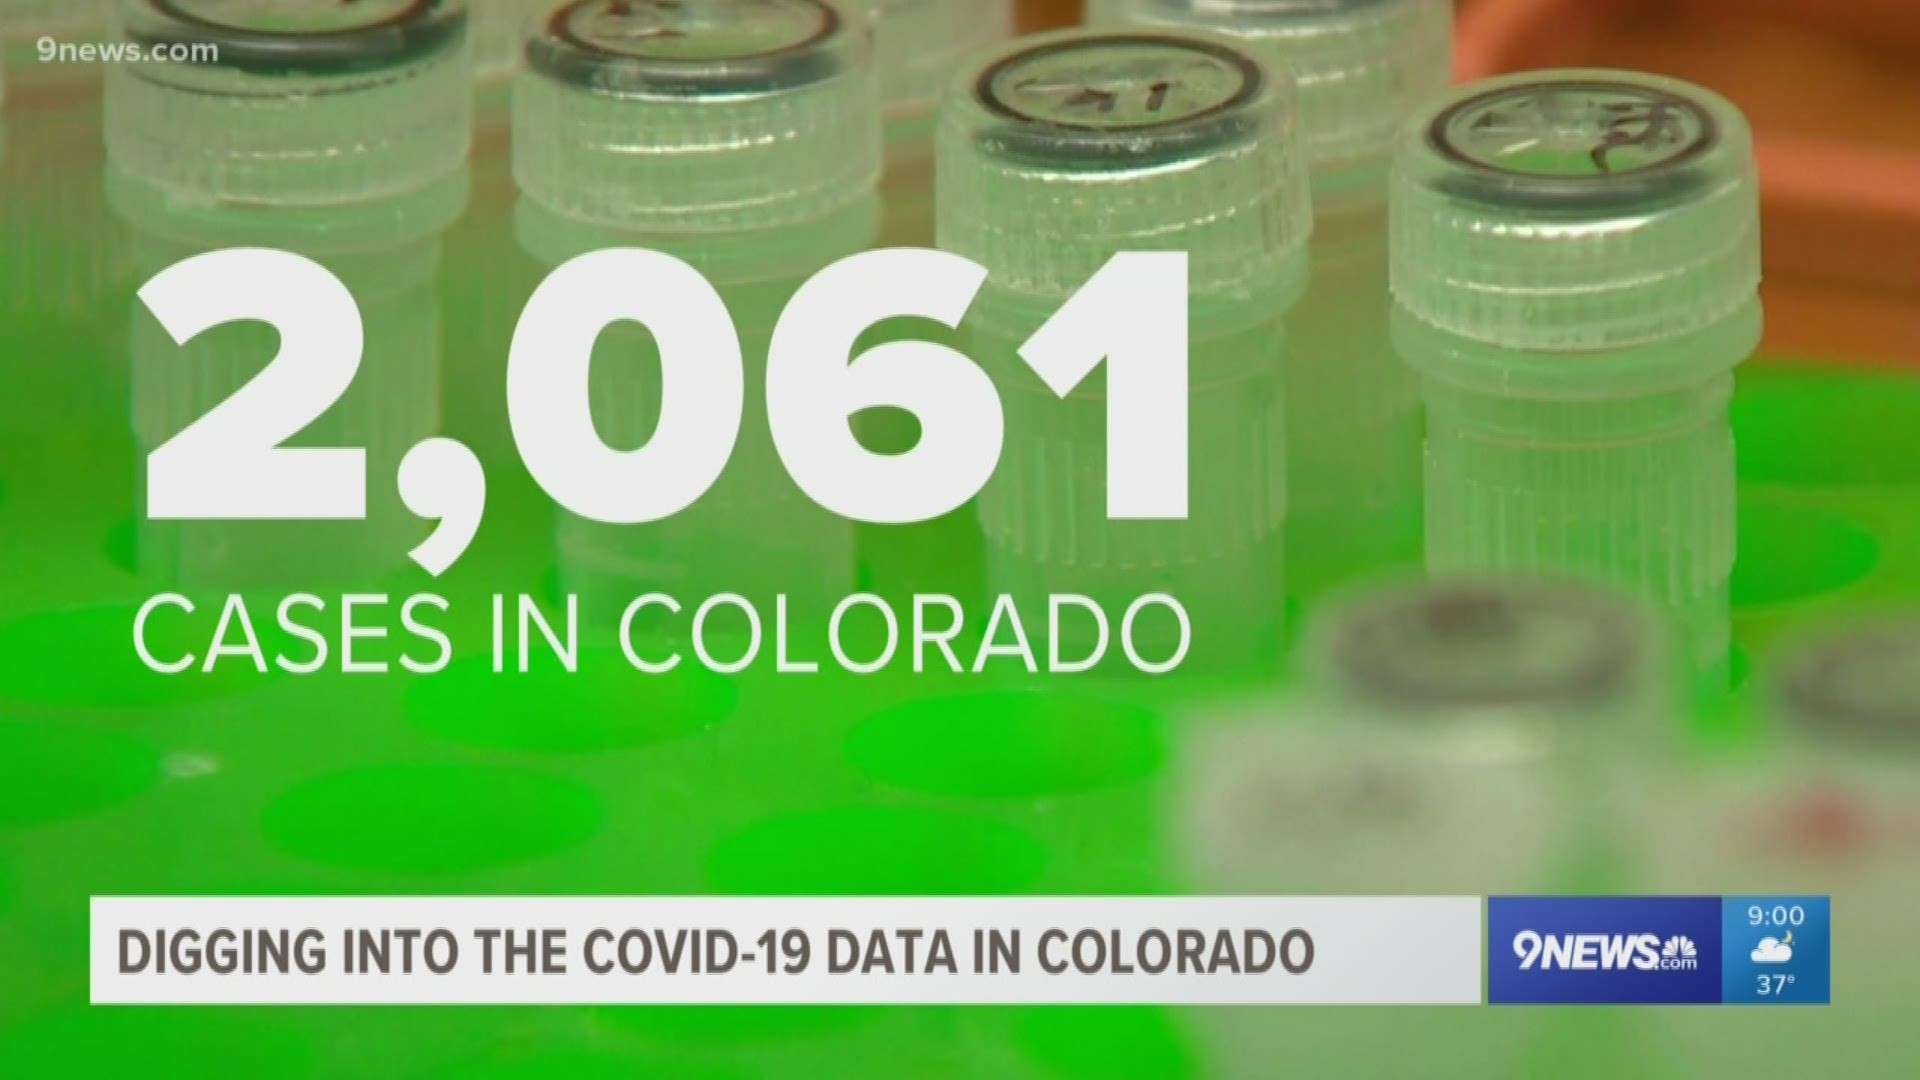 The number of COVID-19 cases in Colorado has topped 2,000.